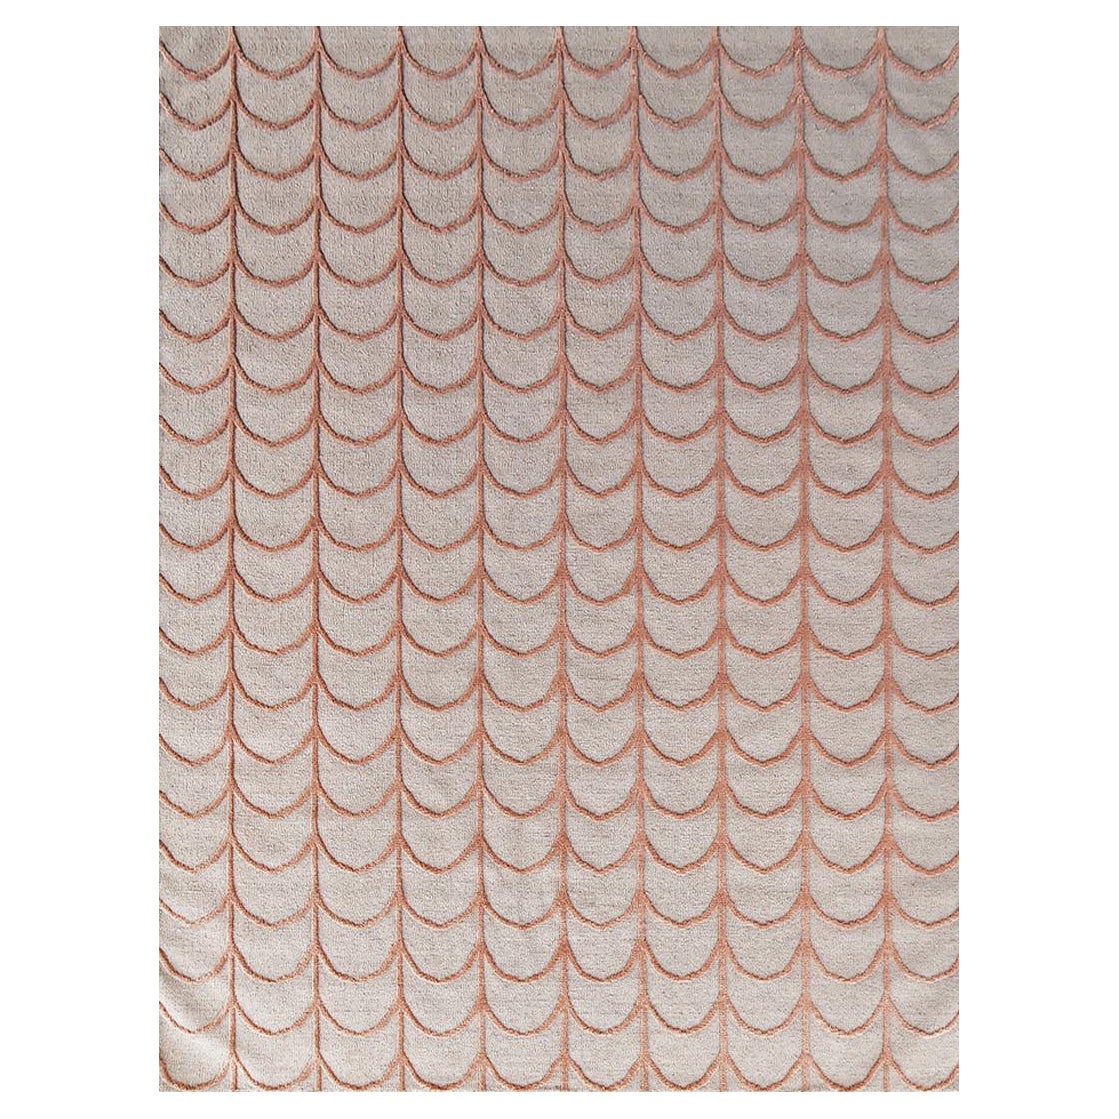 "Opera - Khaki & Coral" /  8' x 10' / Hand-Knotted Wool Rug For Sale